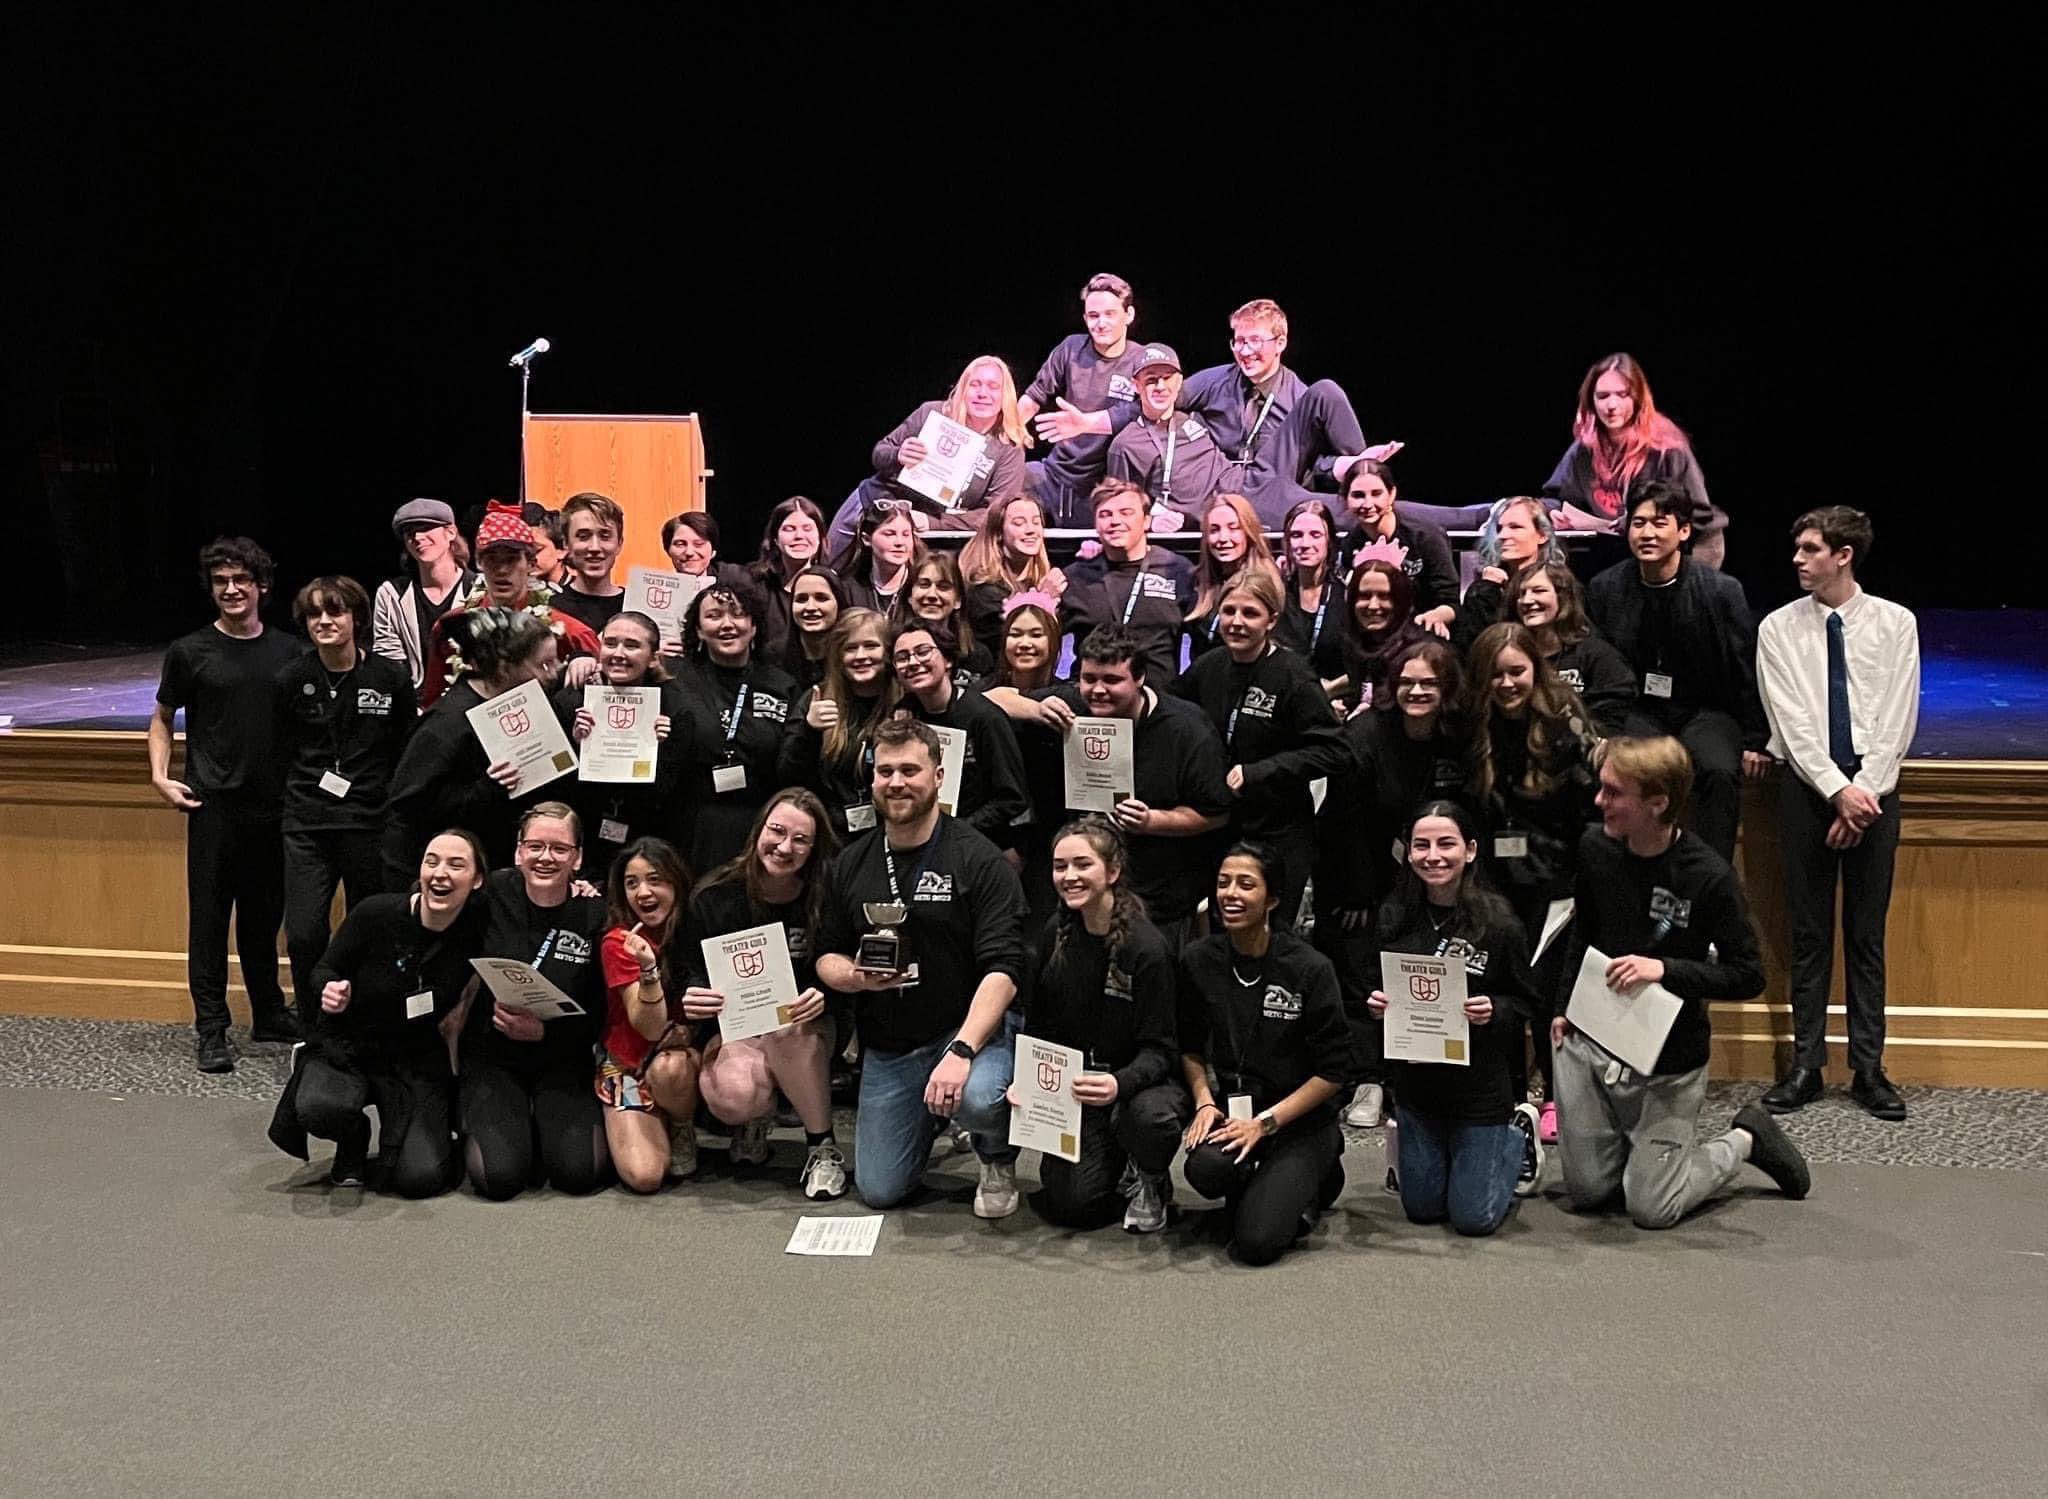 FHSTC was named a Top 2 winner at Drama Fest